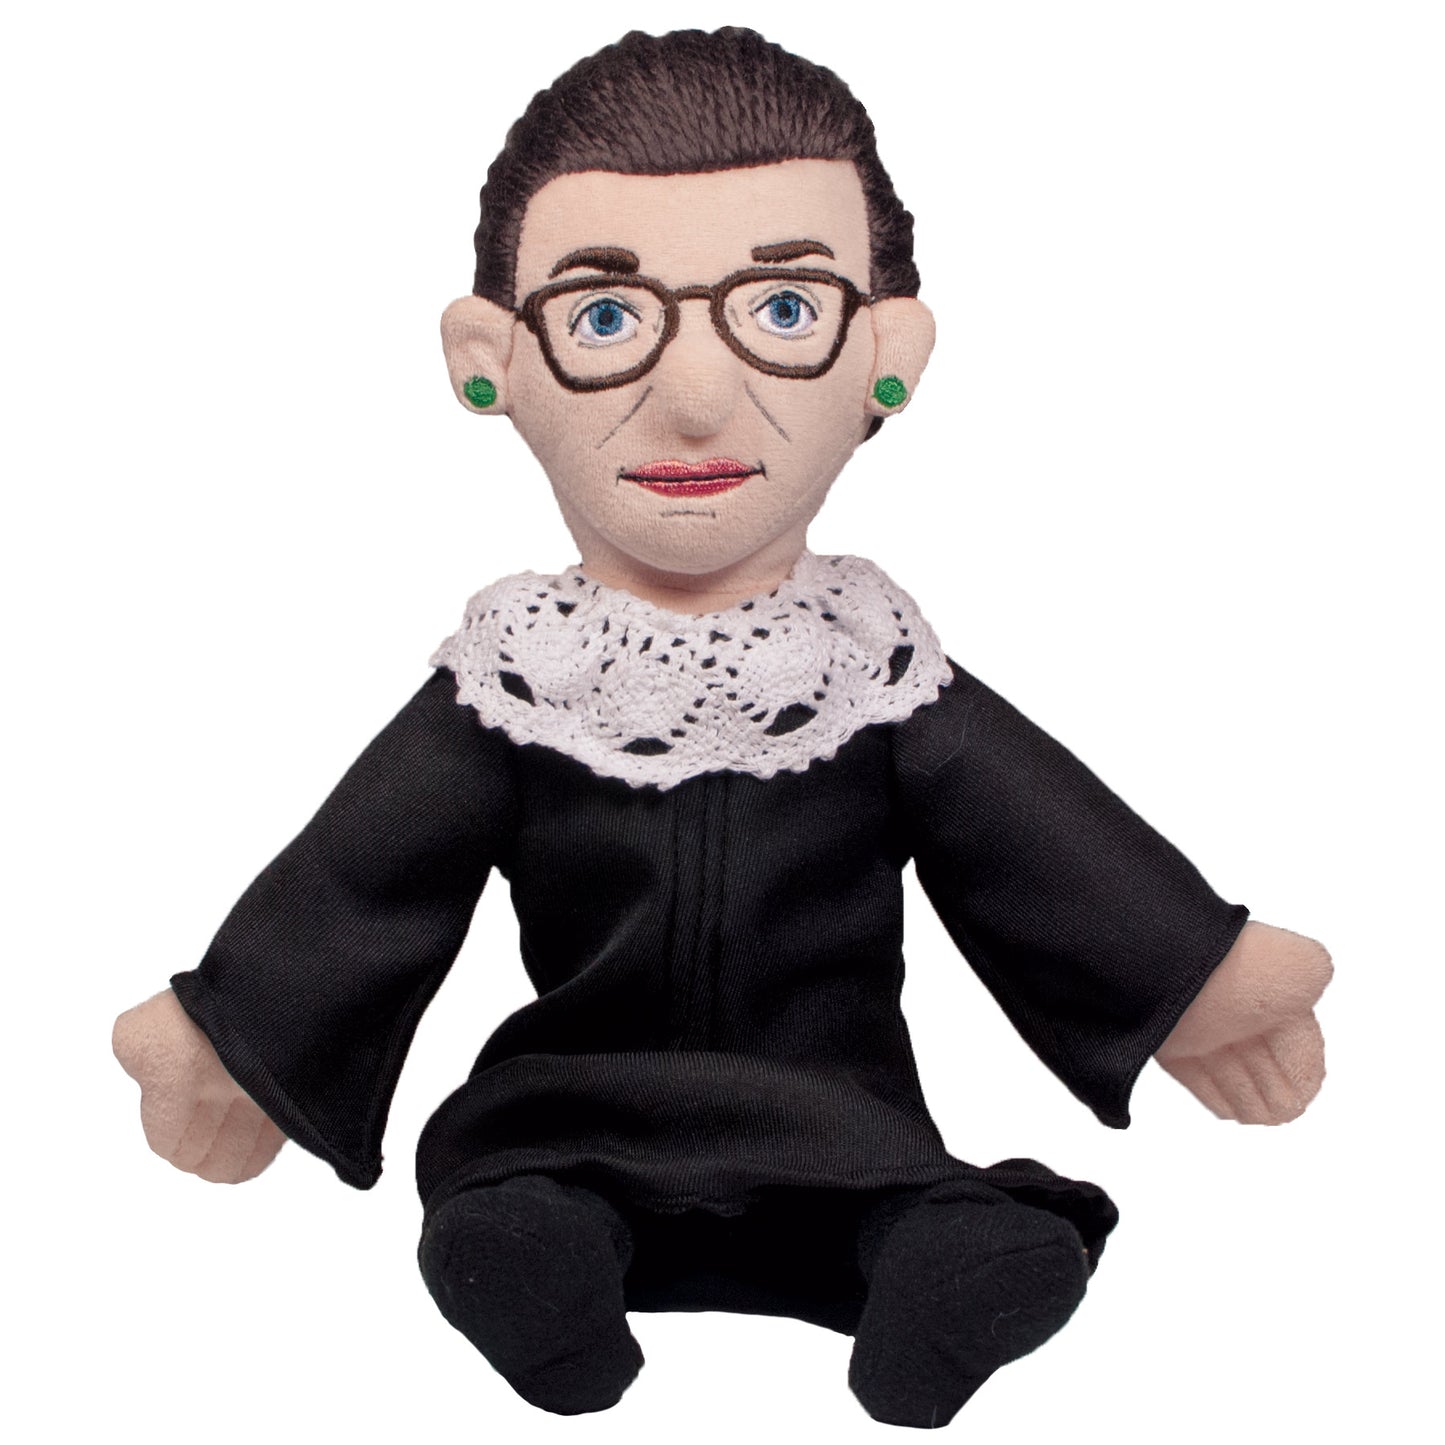 Ruth Bader Ginsburg RBG - Little Thinker Soft Doll from The Unemployed Philosophers Guild